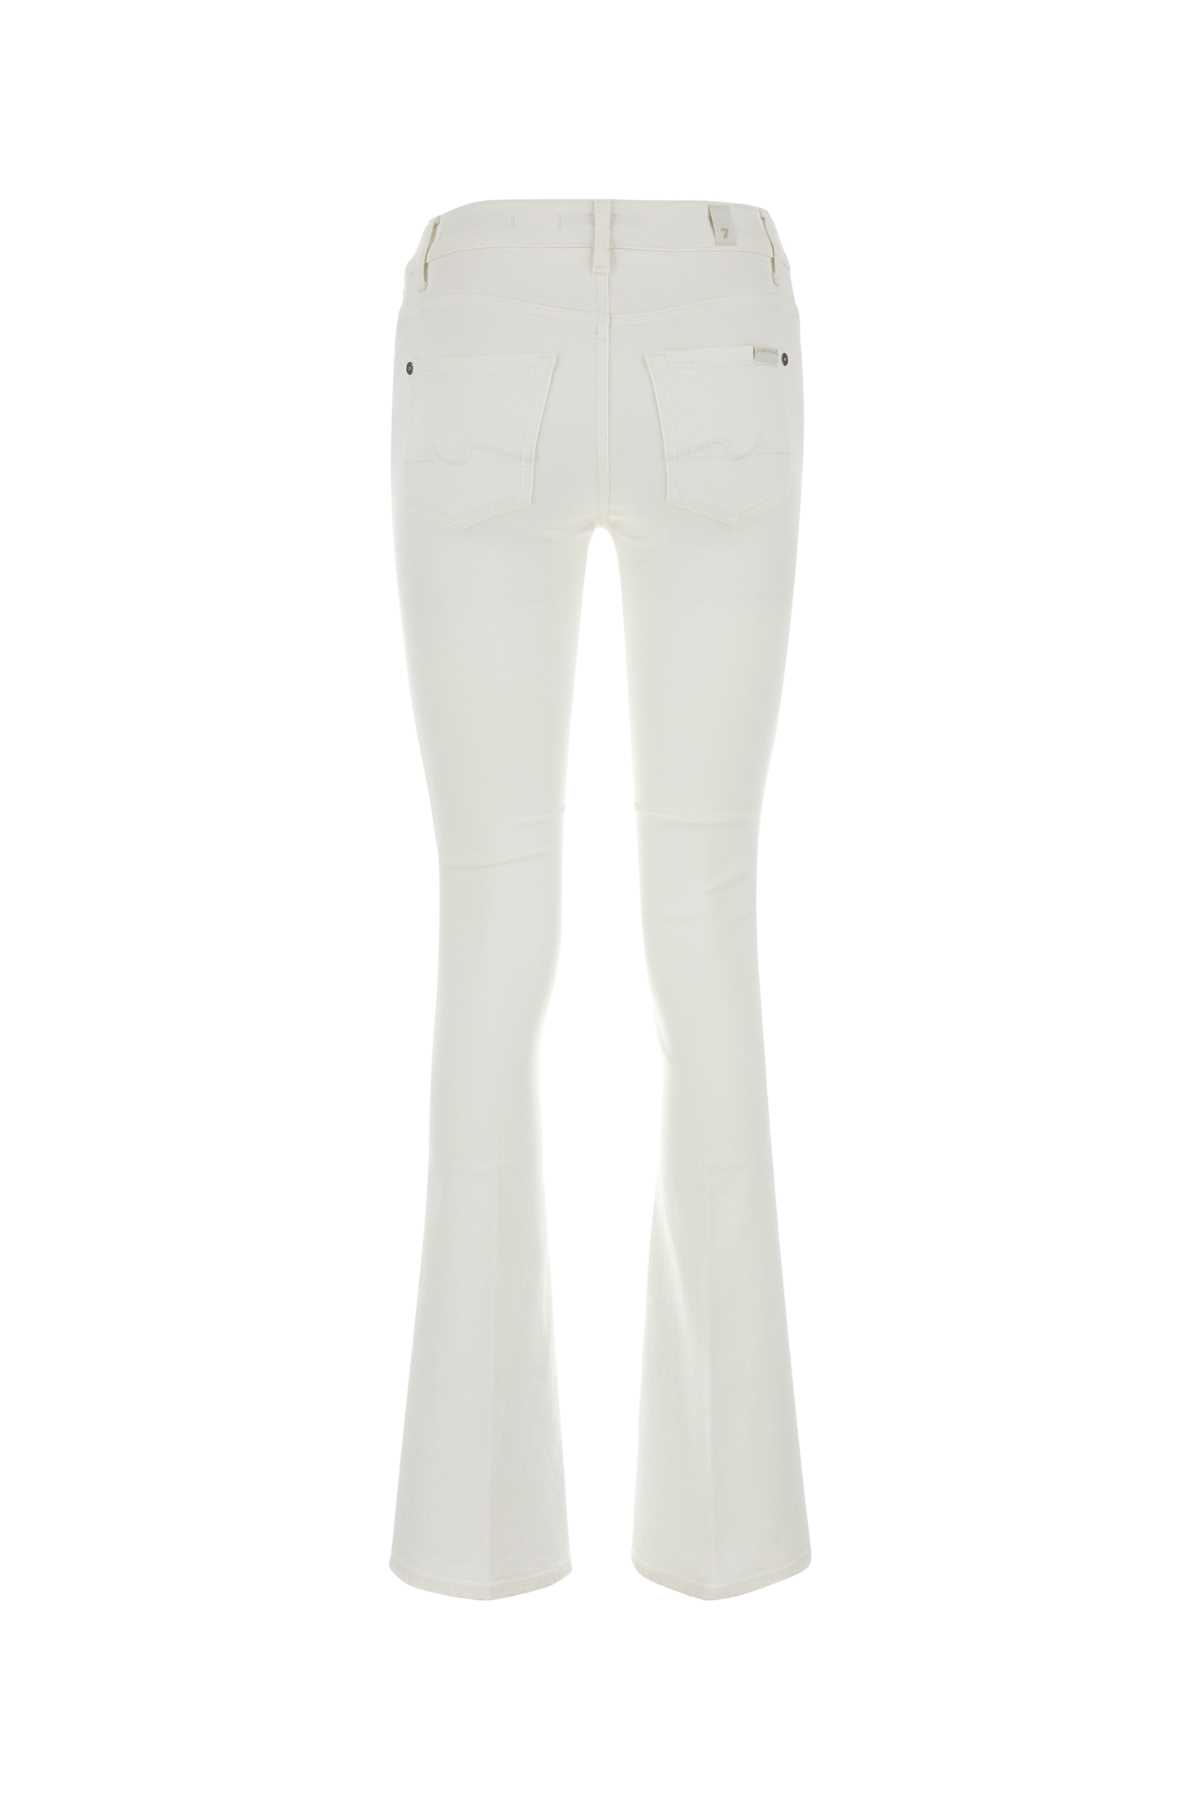 Shop 7 For All Mankind White Stretch Denim Bootcut Jeans